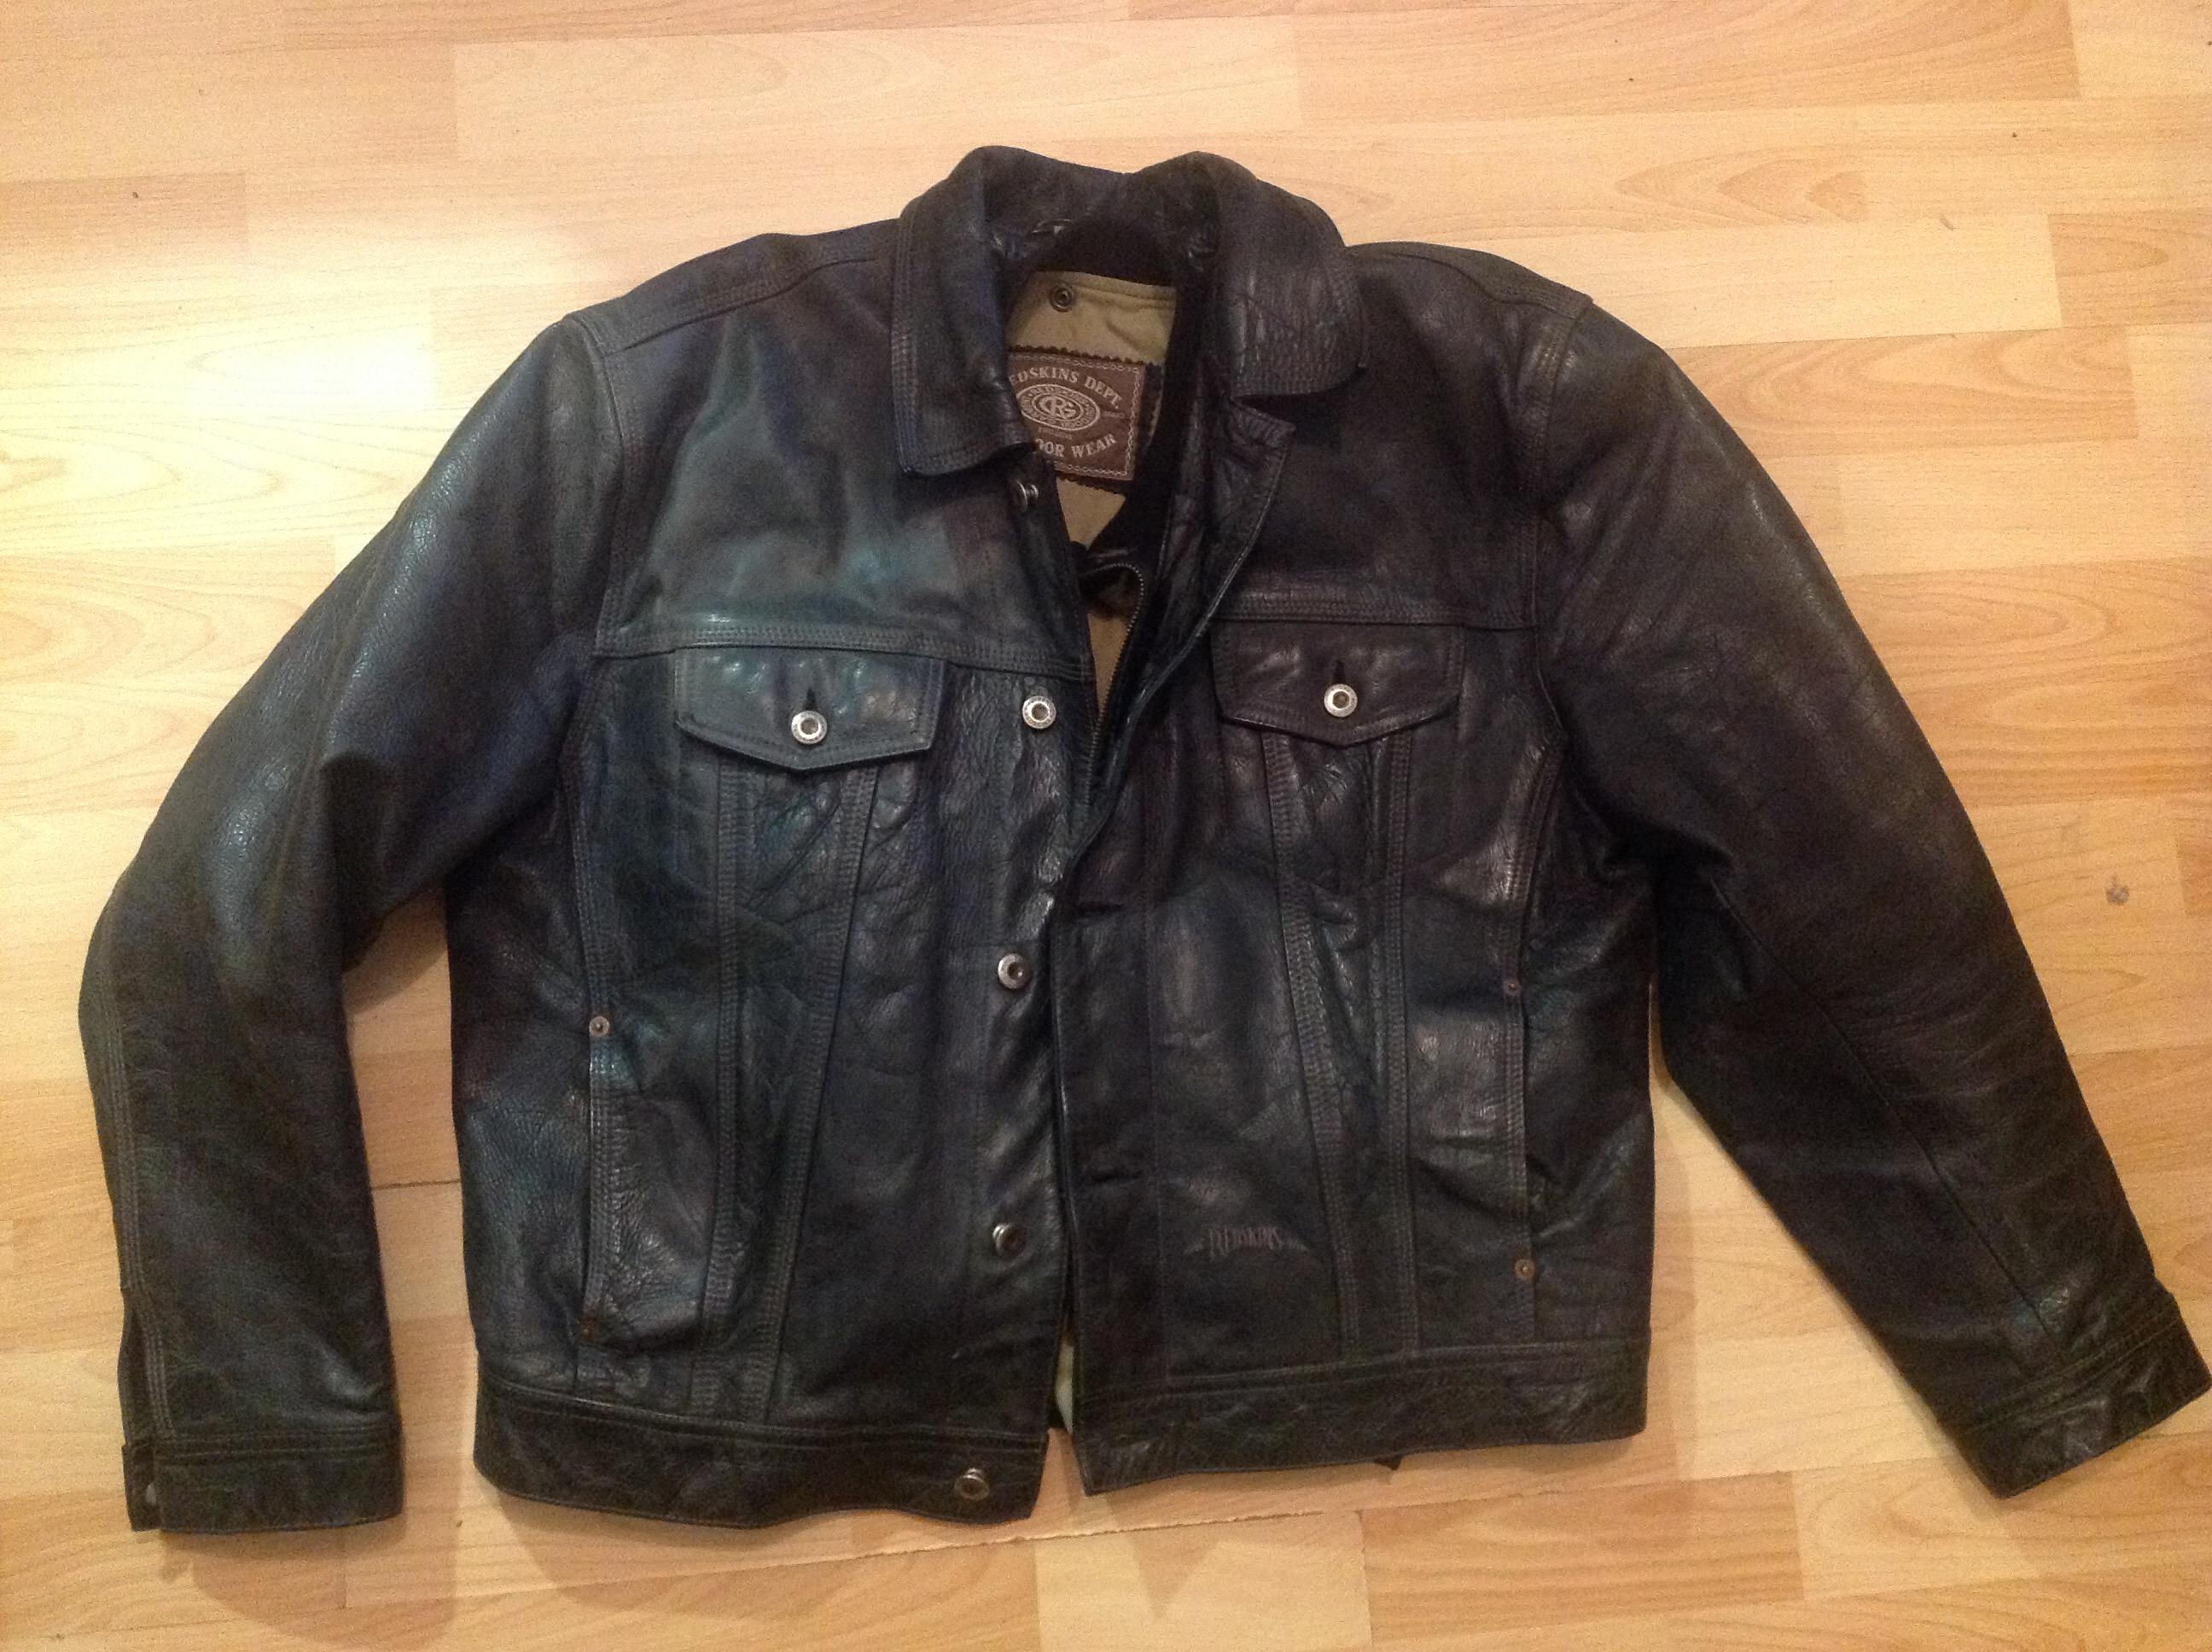 Leather Trucker Levi's / Lee / Type-whatever jackets! | Page 12 | The ...